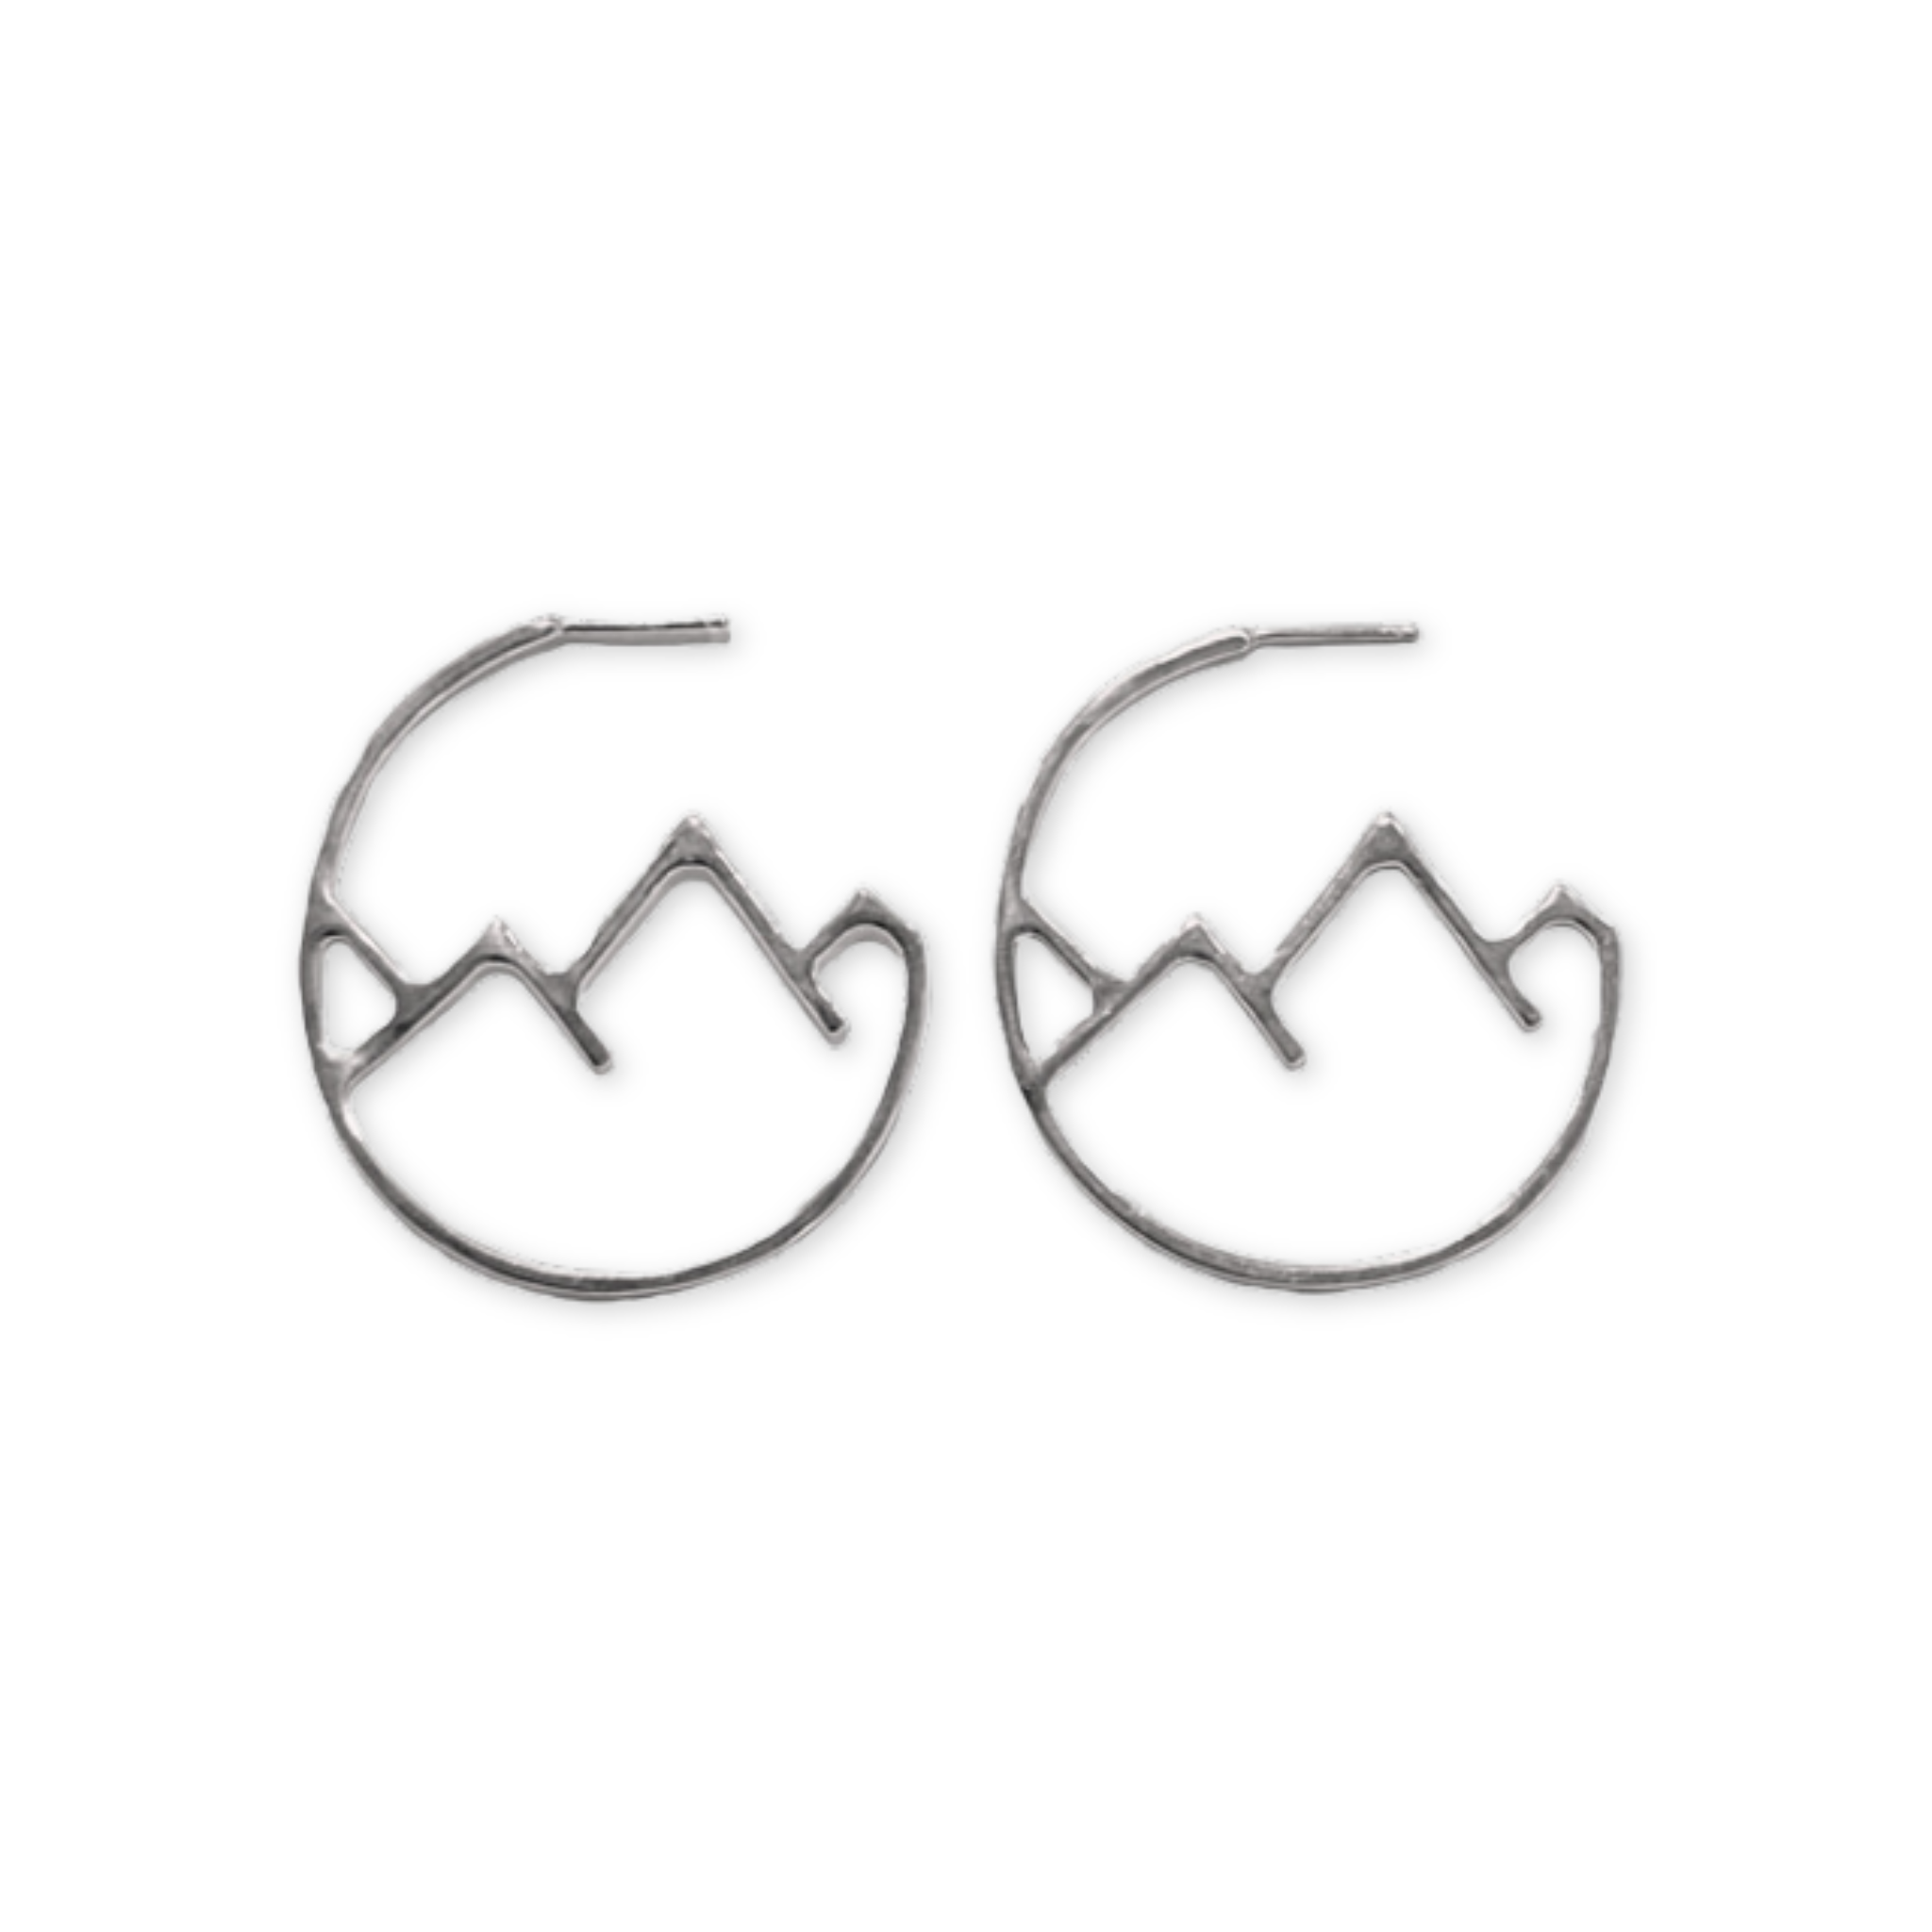 silver hoops with mountain range designs